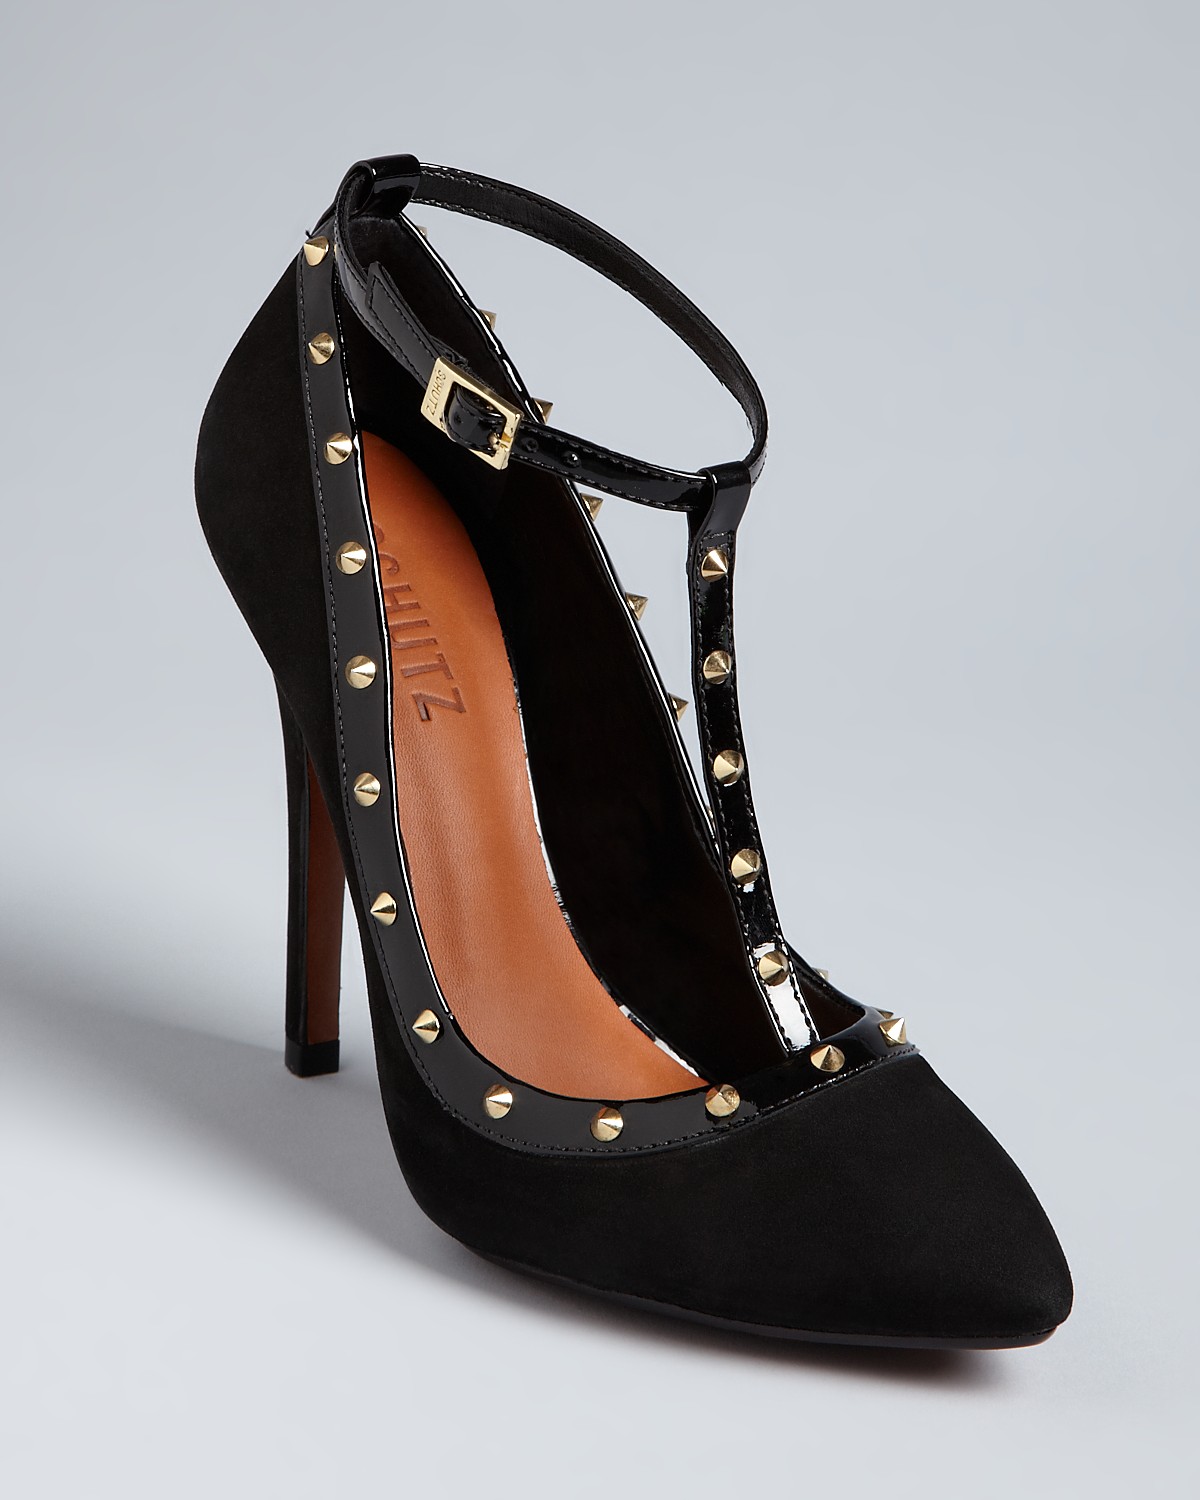 the studded pump...perfect holiday shoe